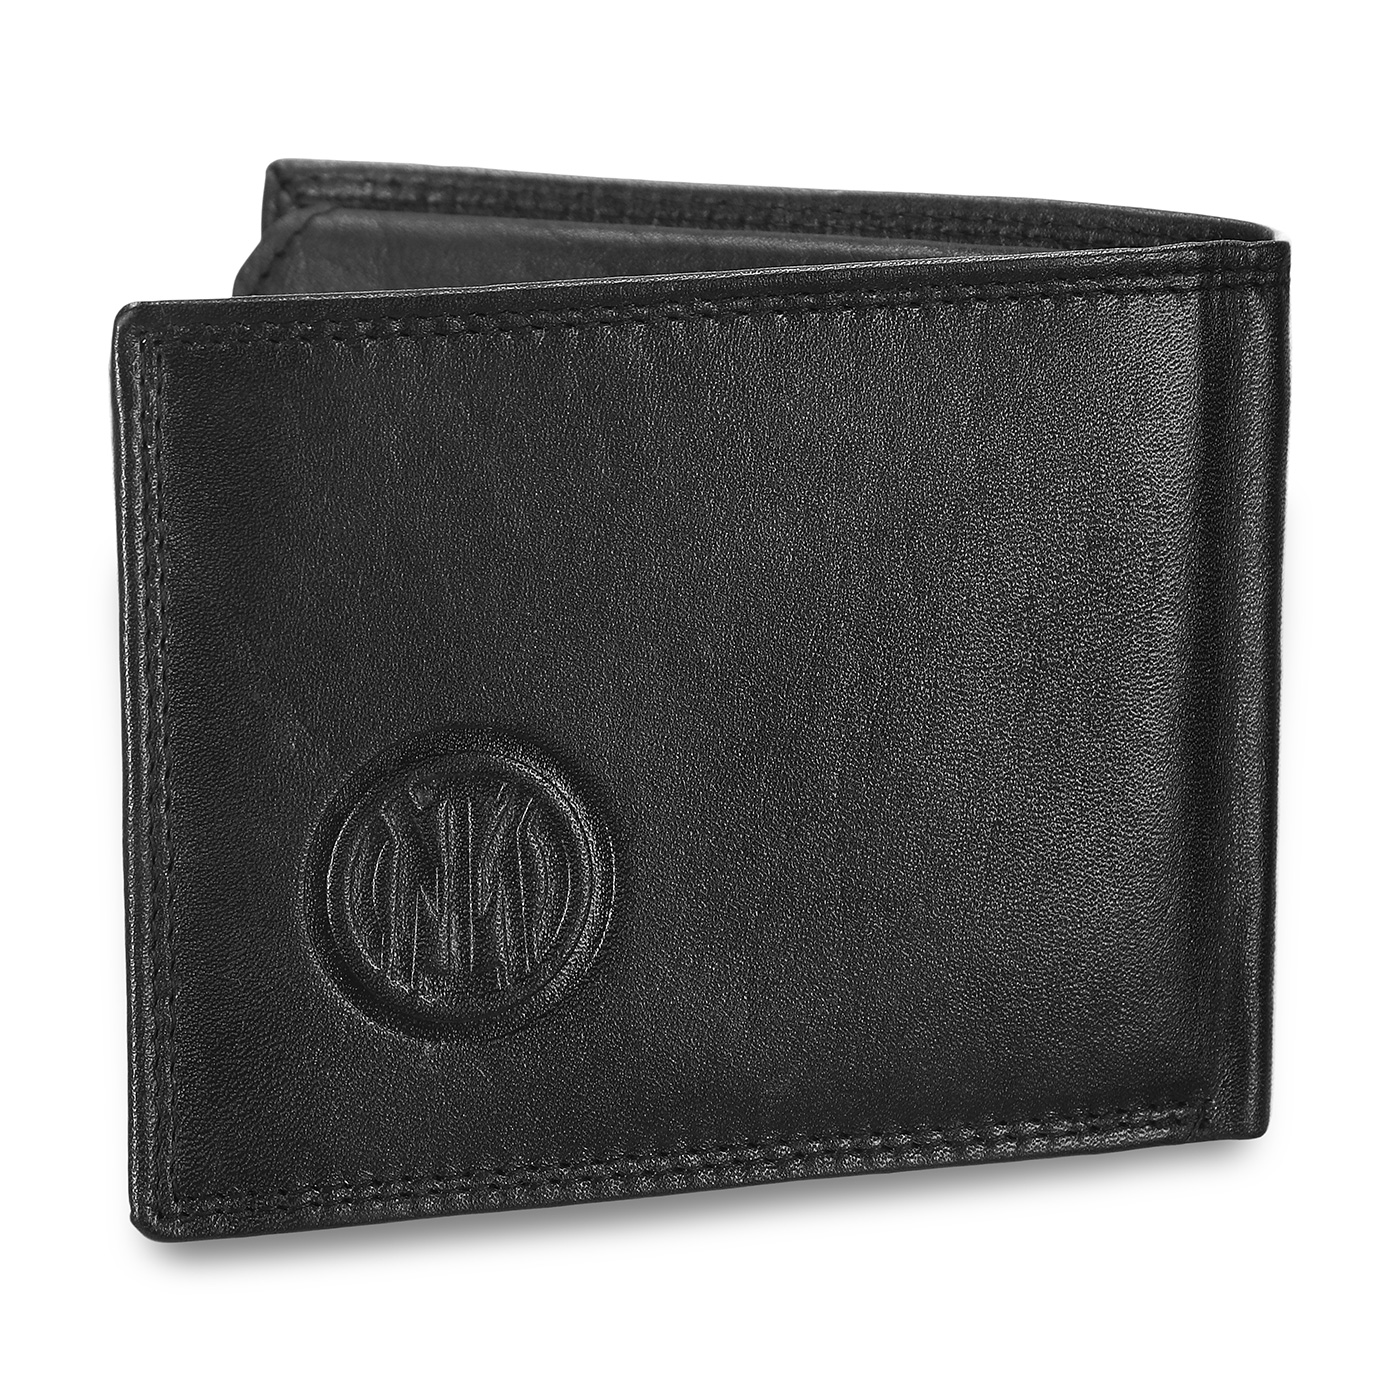 Image IM LOGO AND LETTERING LEATHER WALLET - 1 